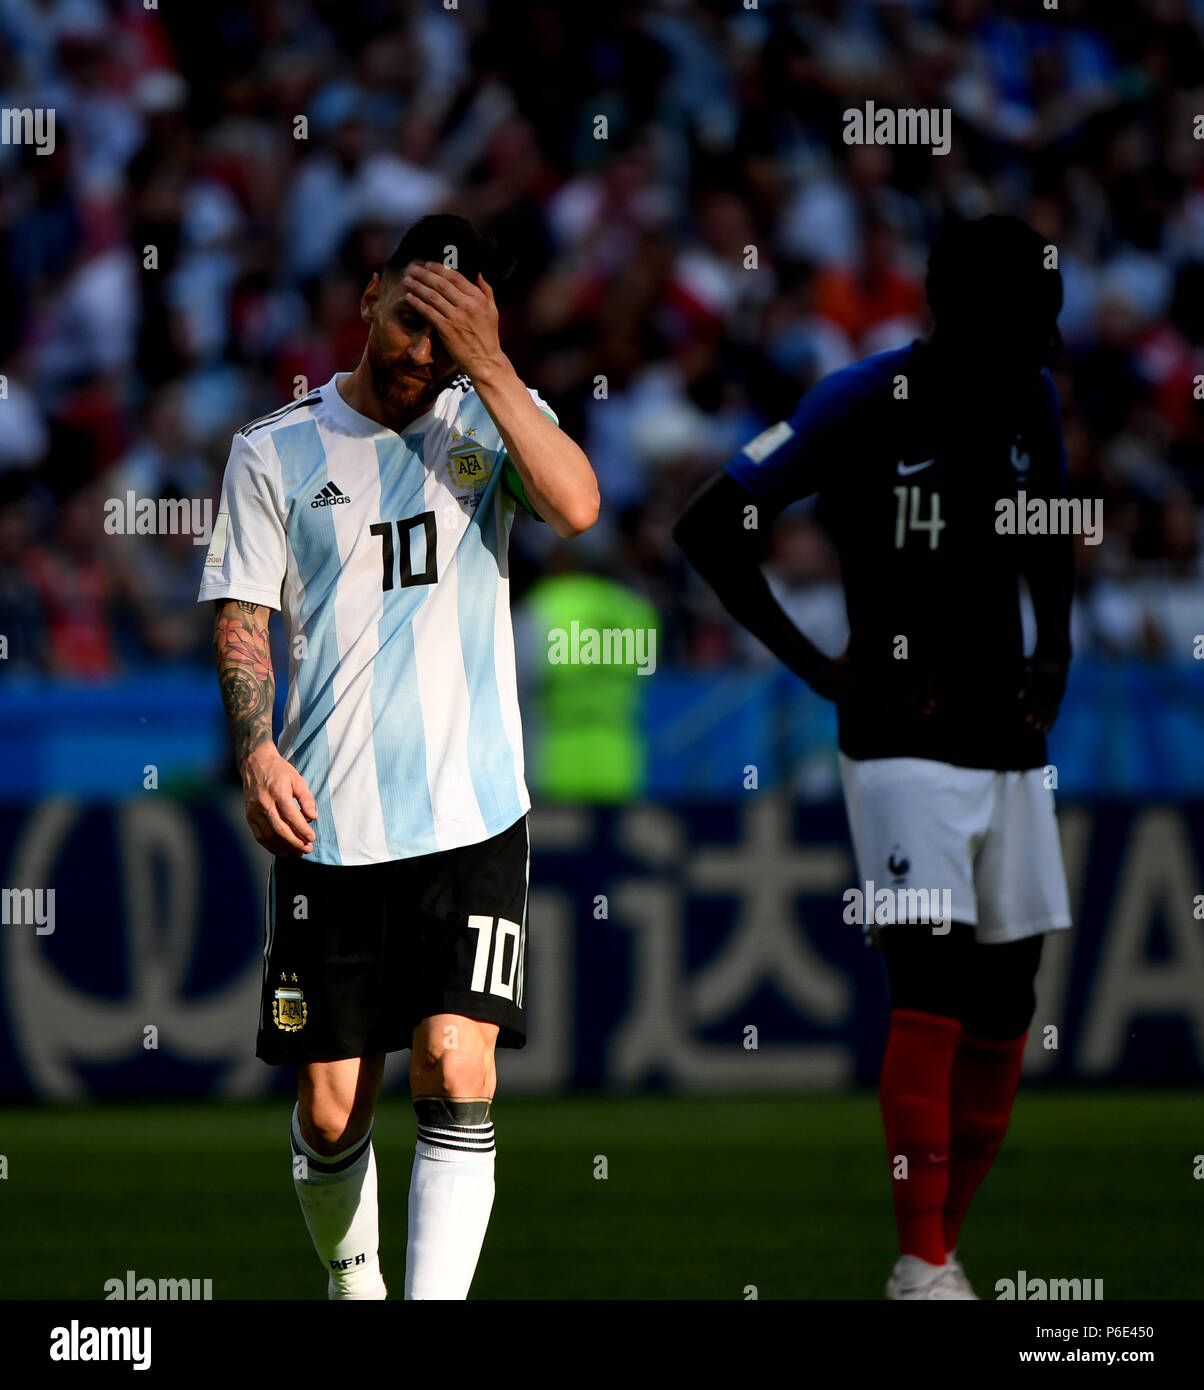 (180630) -- KAZAN, June 30, 2018 (Xinhua) -- Lionel Messi of Argentina reacts during the 2018 FIFA World Cup round of 16 match between France and Argentina in Kazan, Russia, June 30, 2018. (Xinhua/Li Ga) Stock Photo